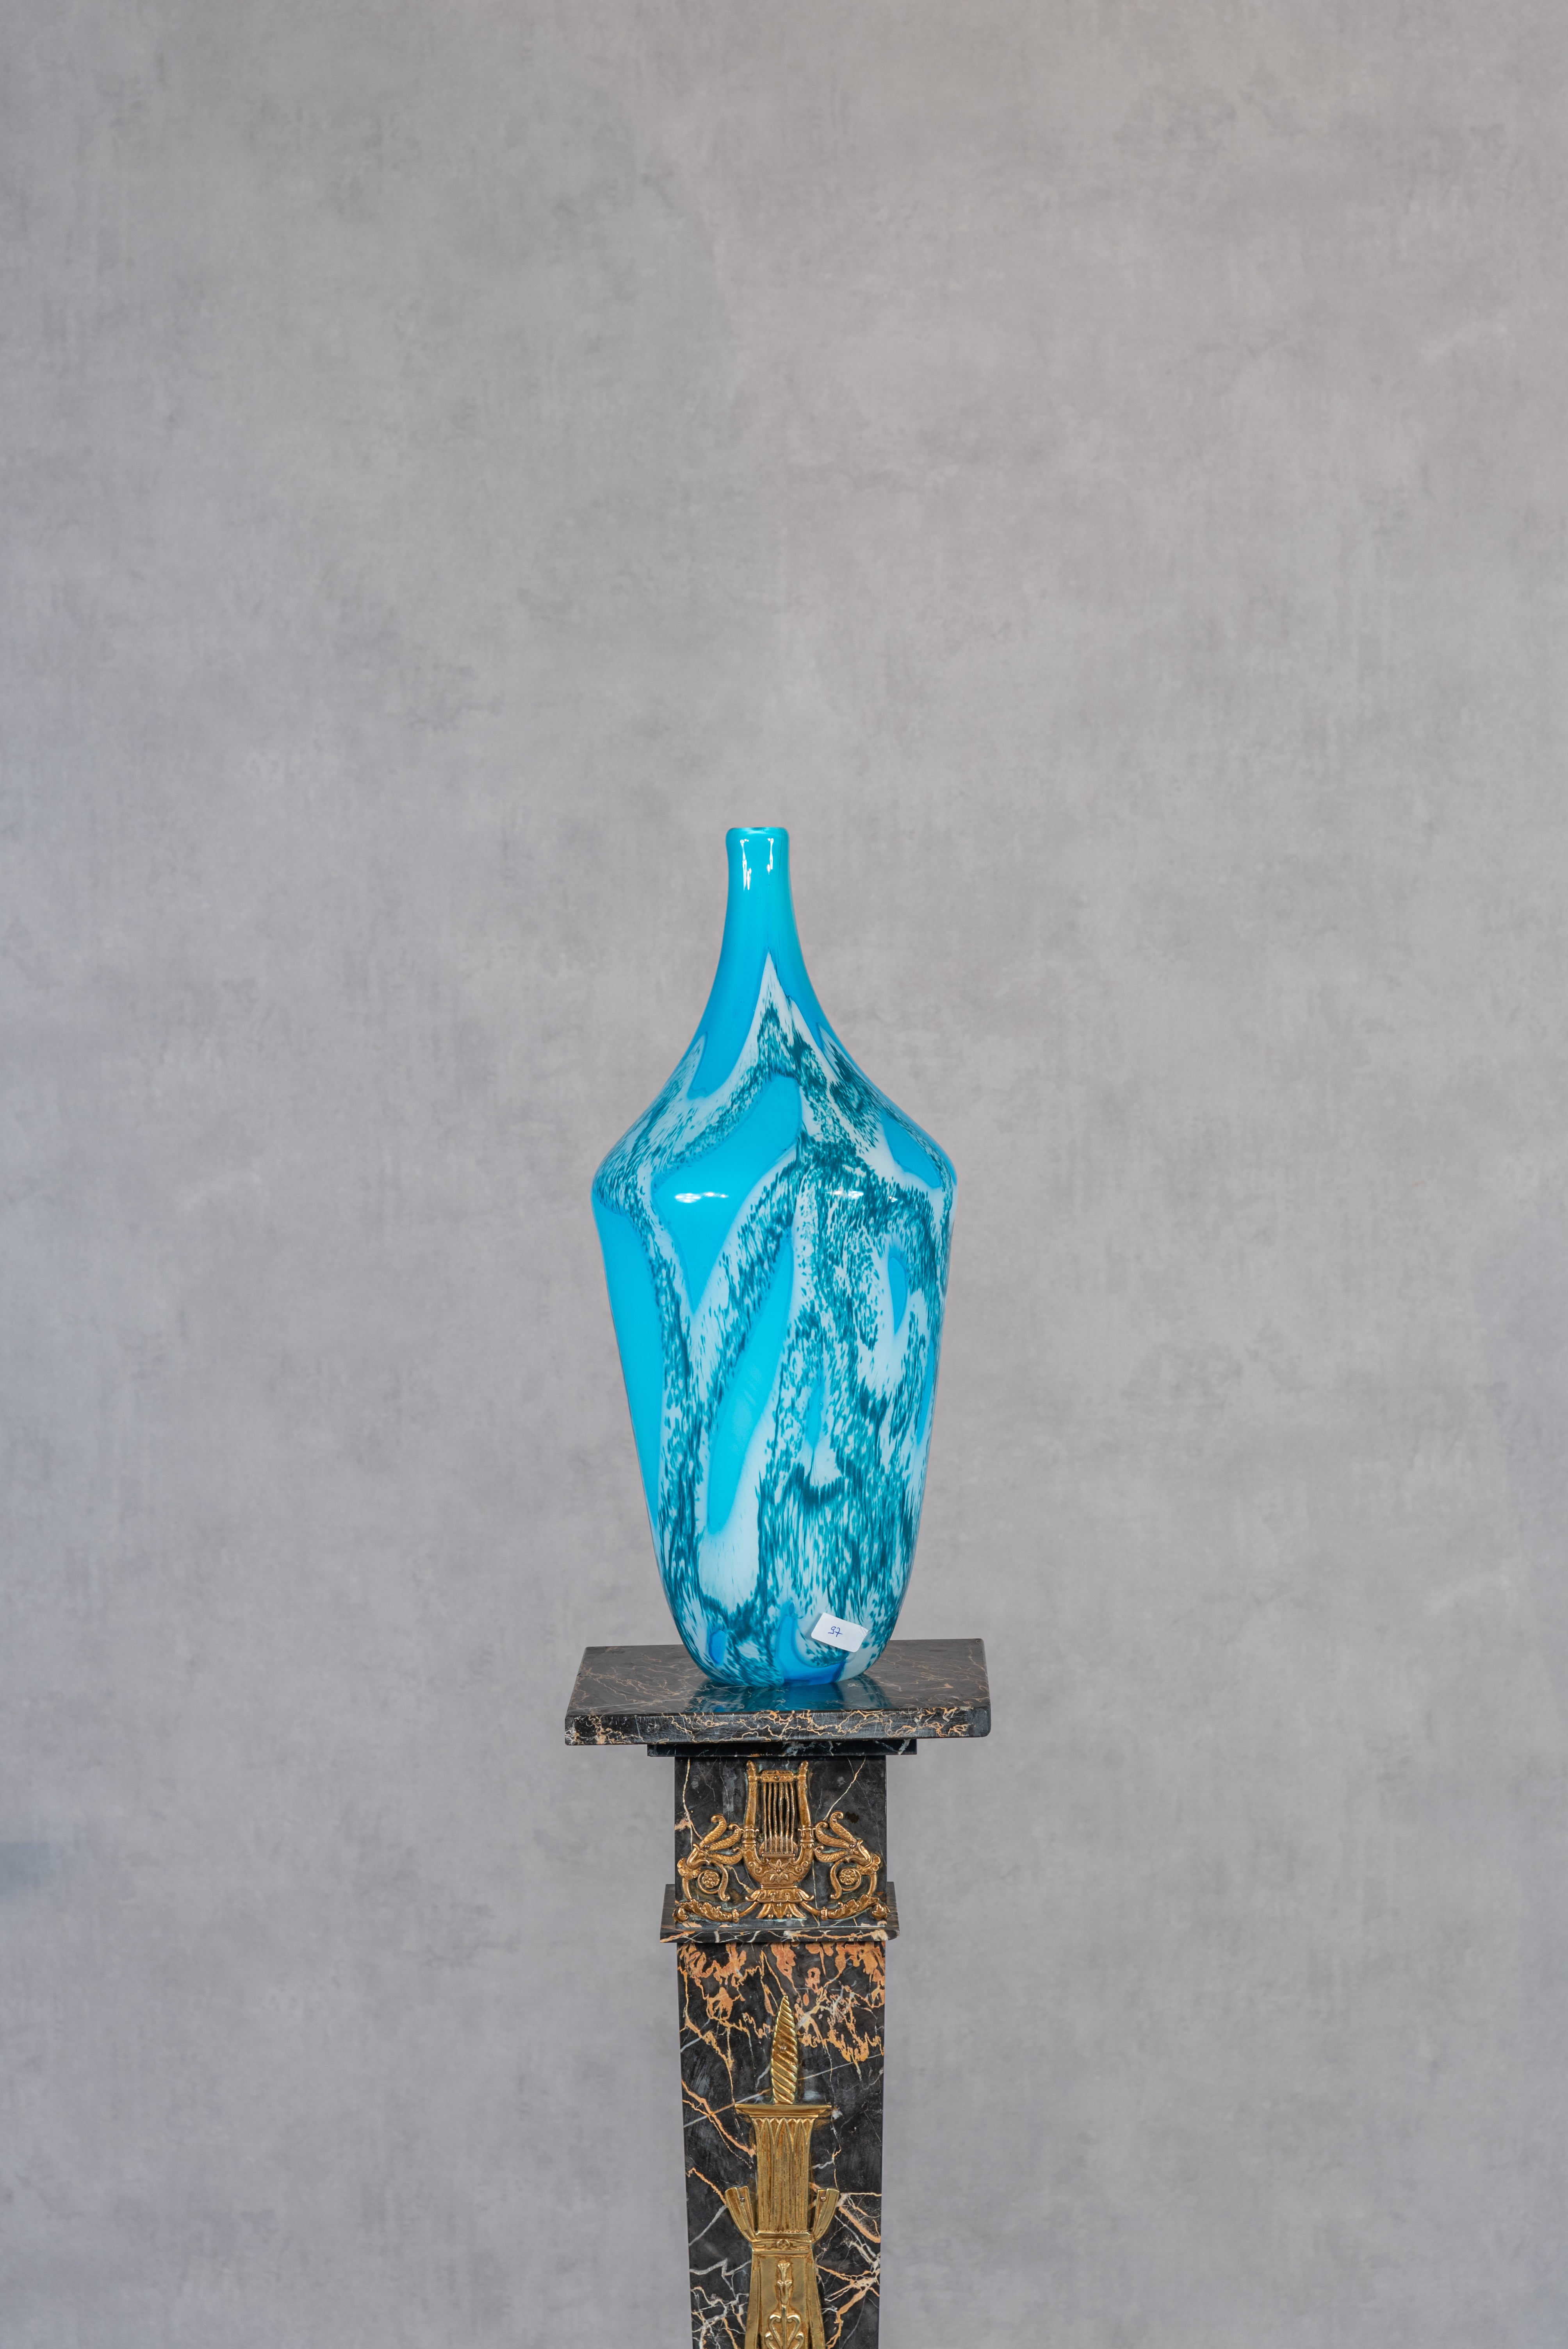 This Large 20th century Clichy Vase is a captivating piece of art that showcases the beauty and craftsmanship of Clichy glassware. Crafted in the 20th century, it embodies the elegance and refinement for which Clichy is renowned. The vase features a